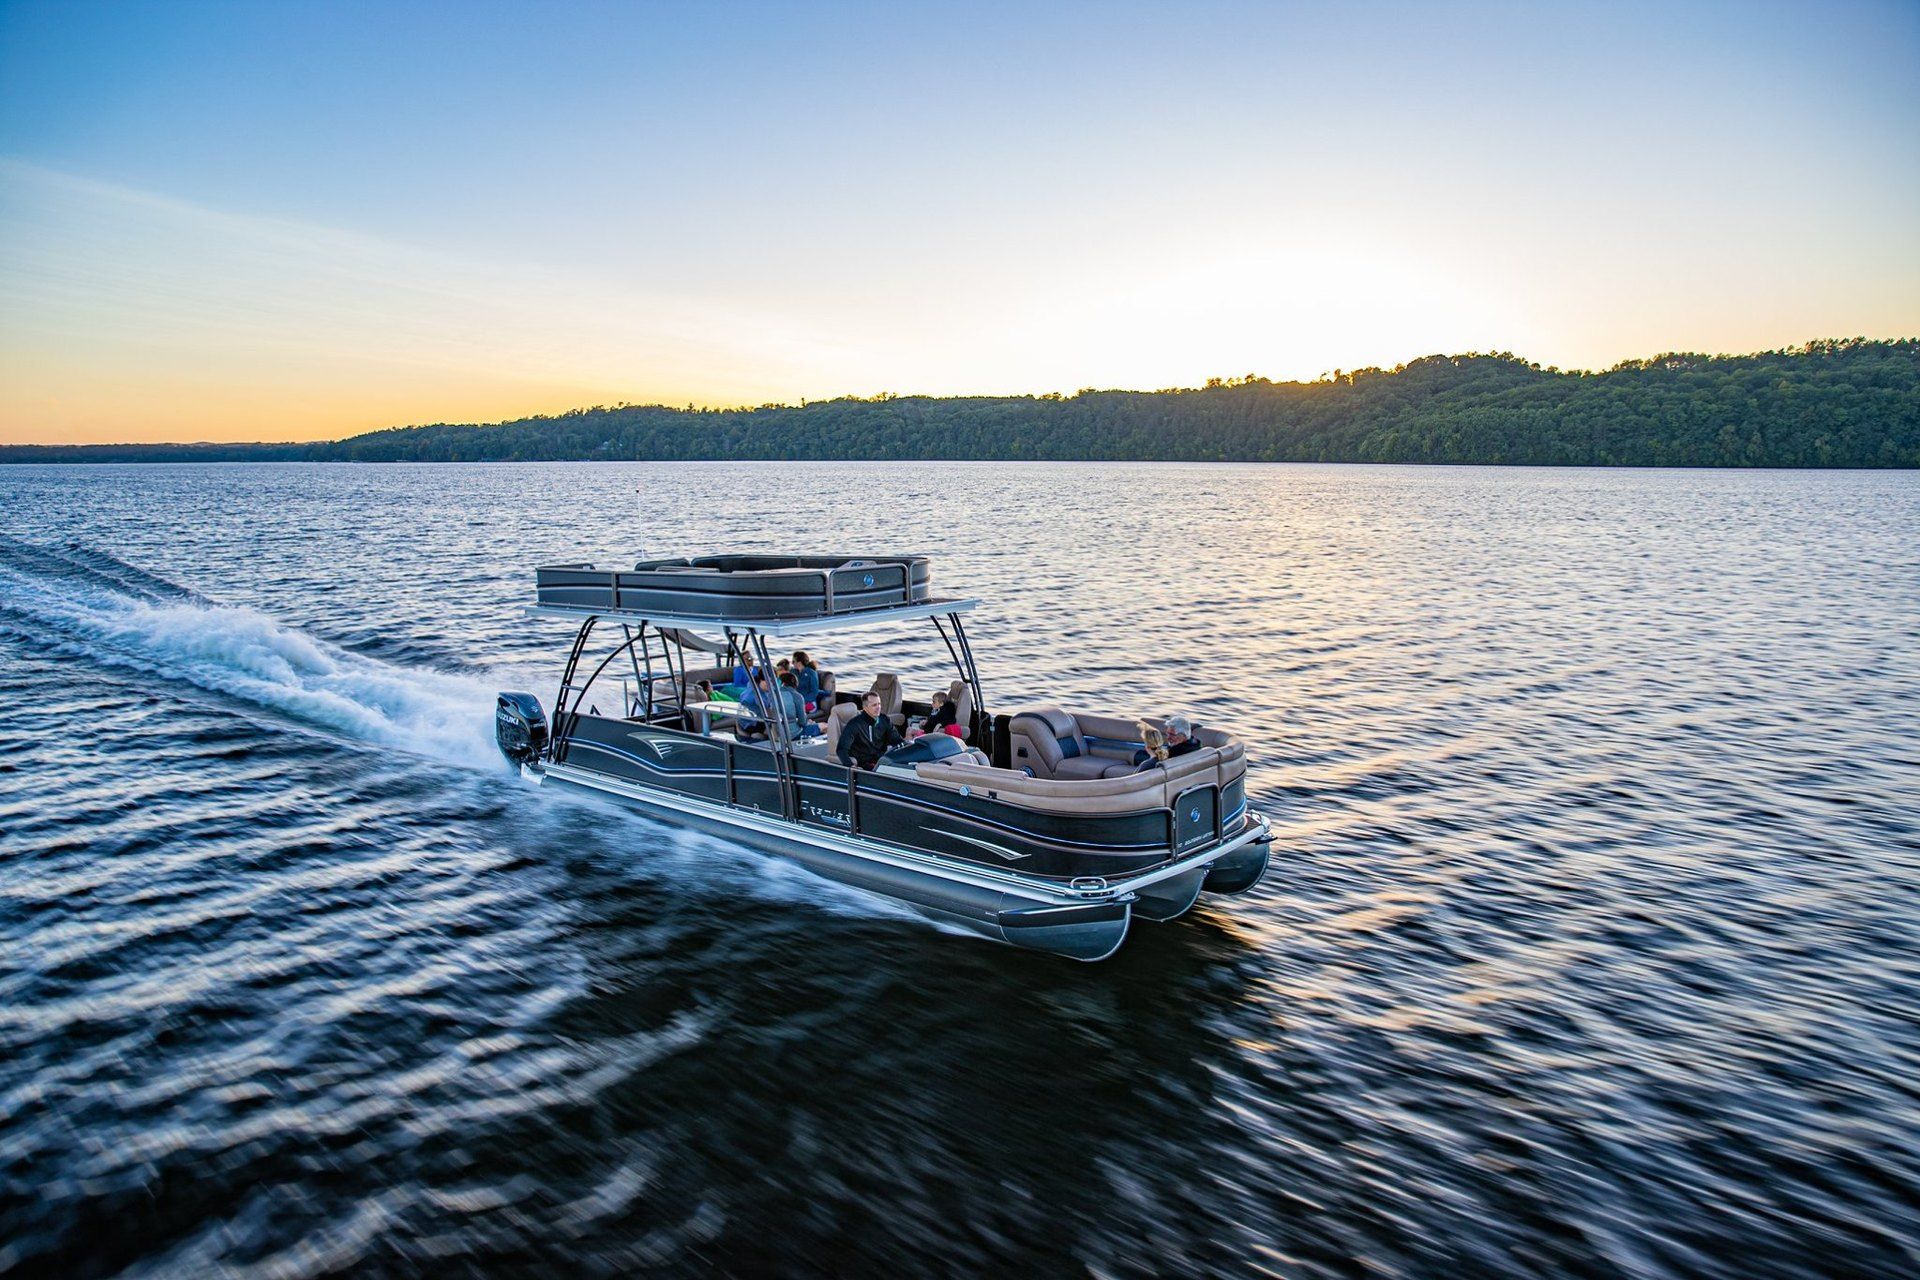 Image Introducing Our 2022 Boat Models Premier Pontoon Boundary Waters Revolution Walk On Boat